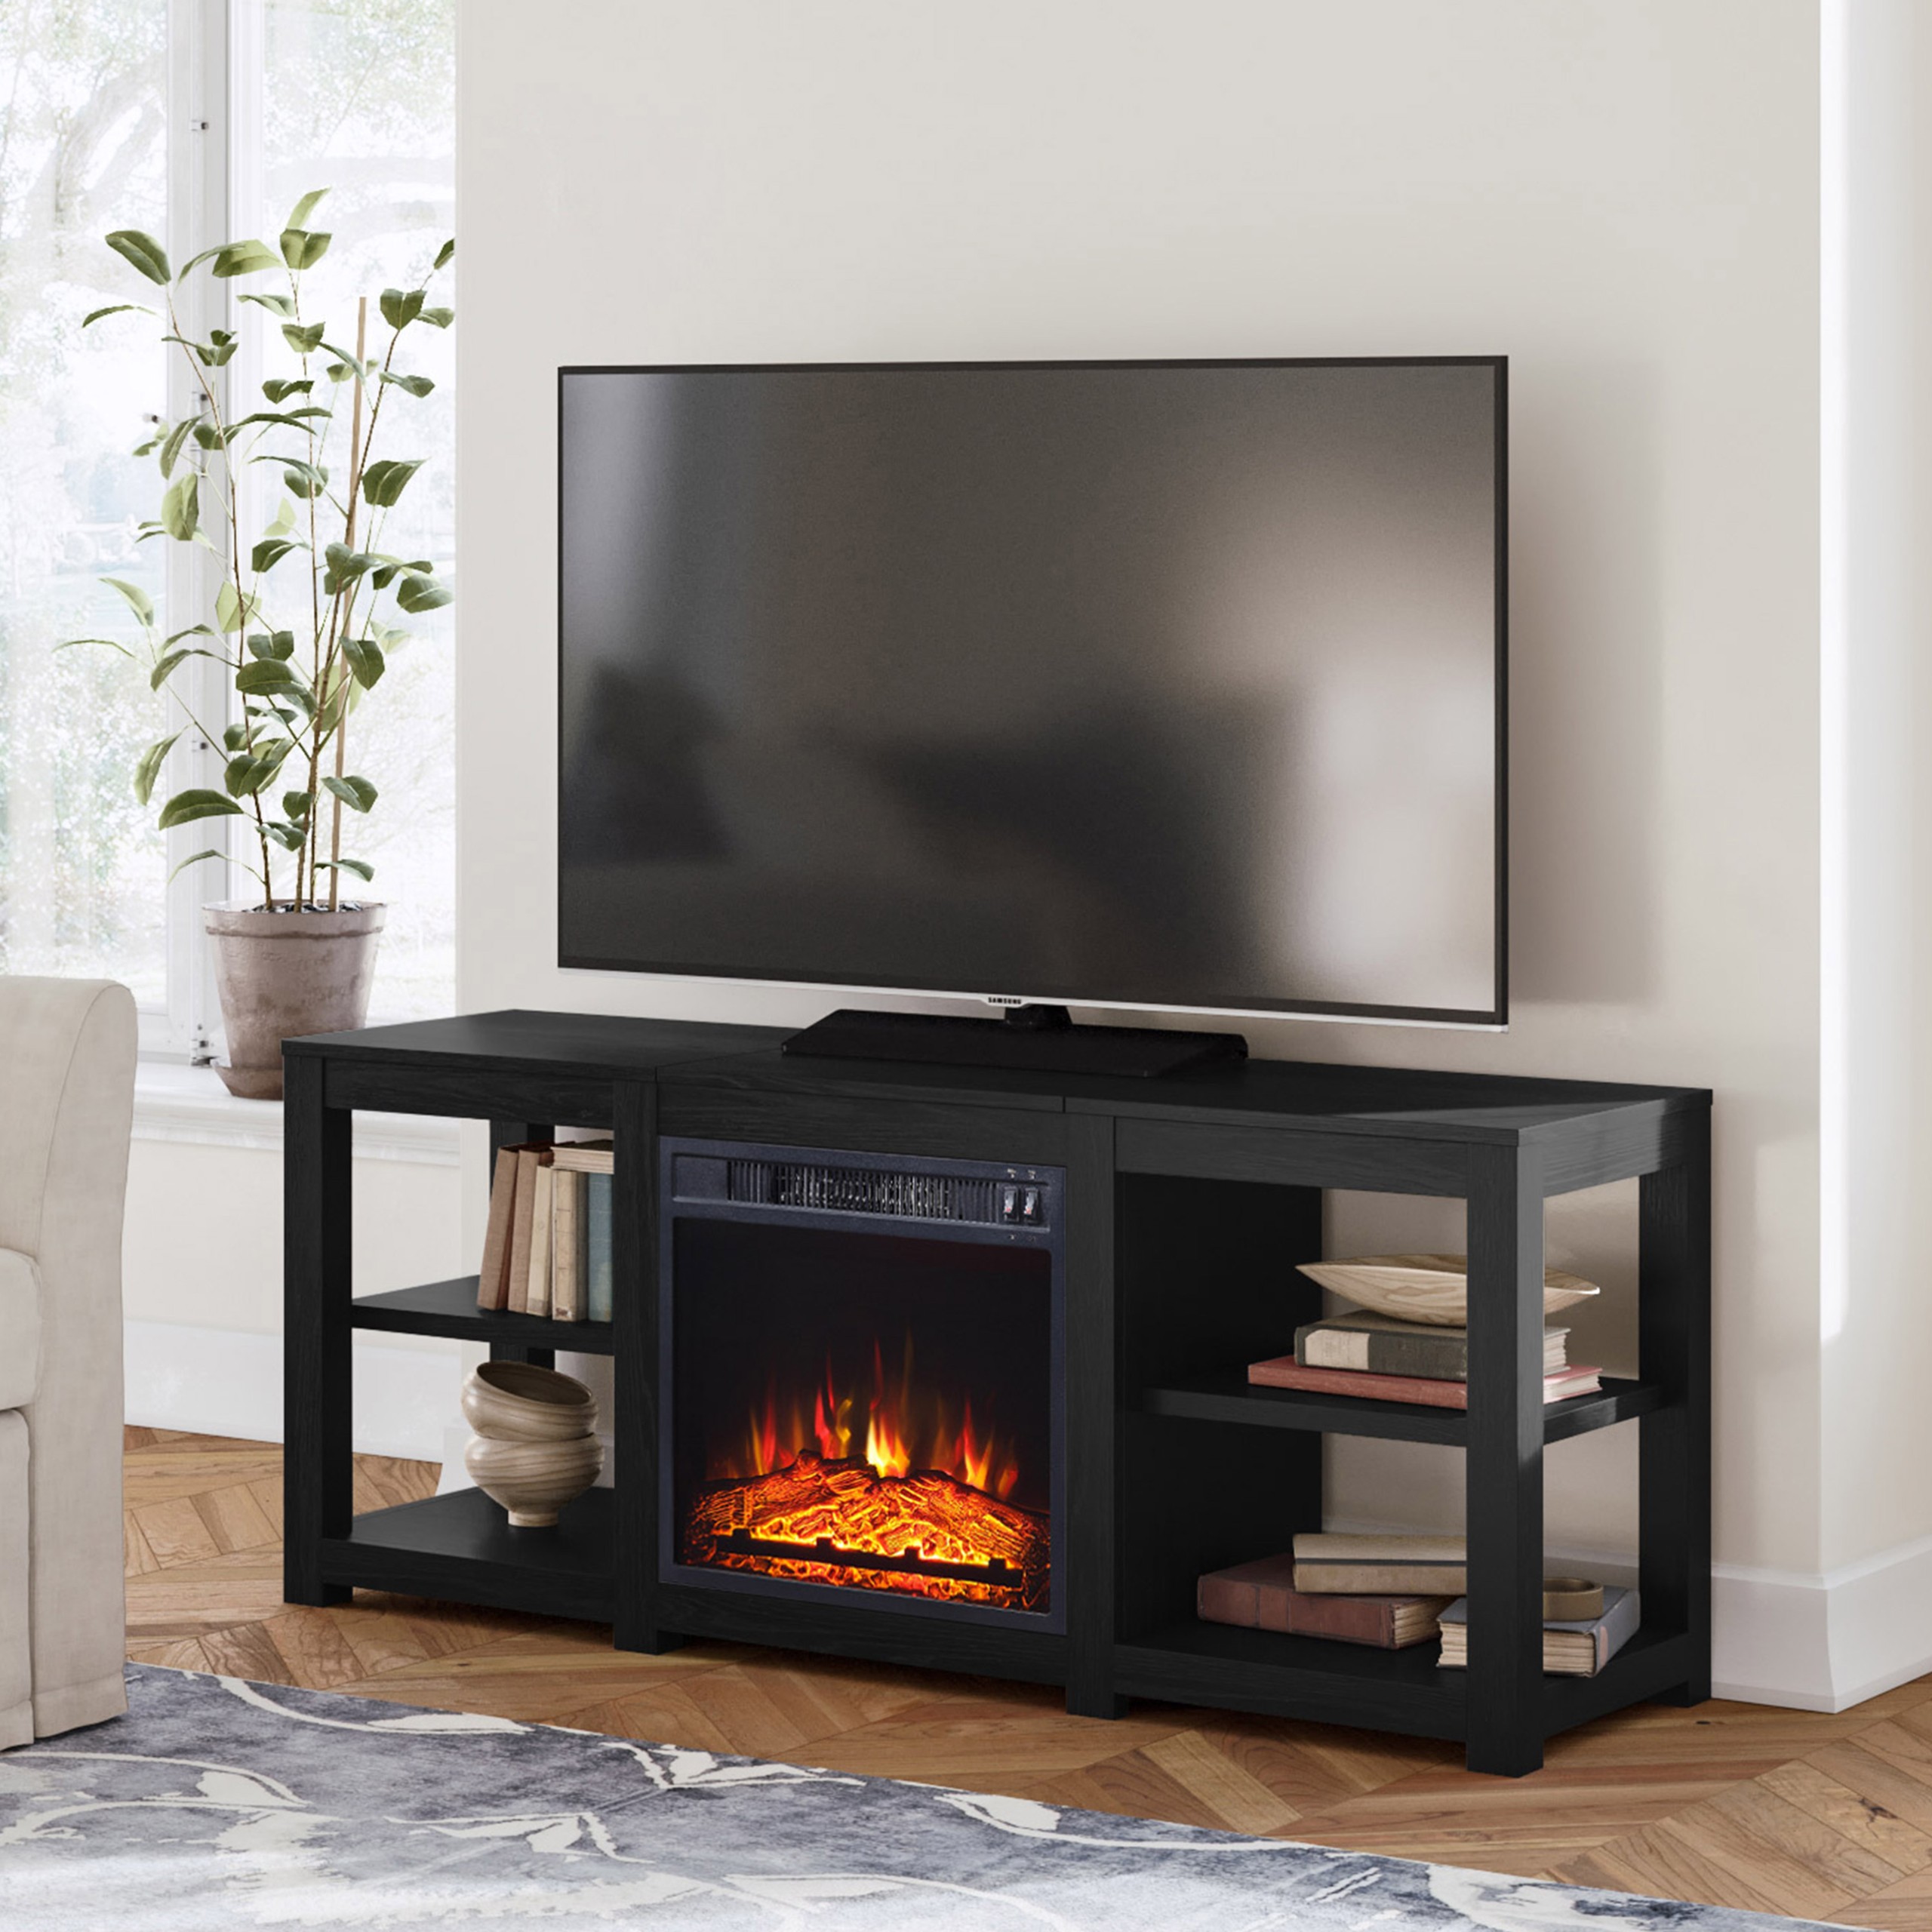 Mainstays 4 shelf media fireplace tv stand for flat panel